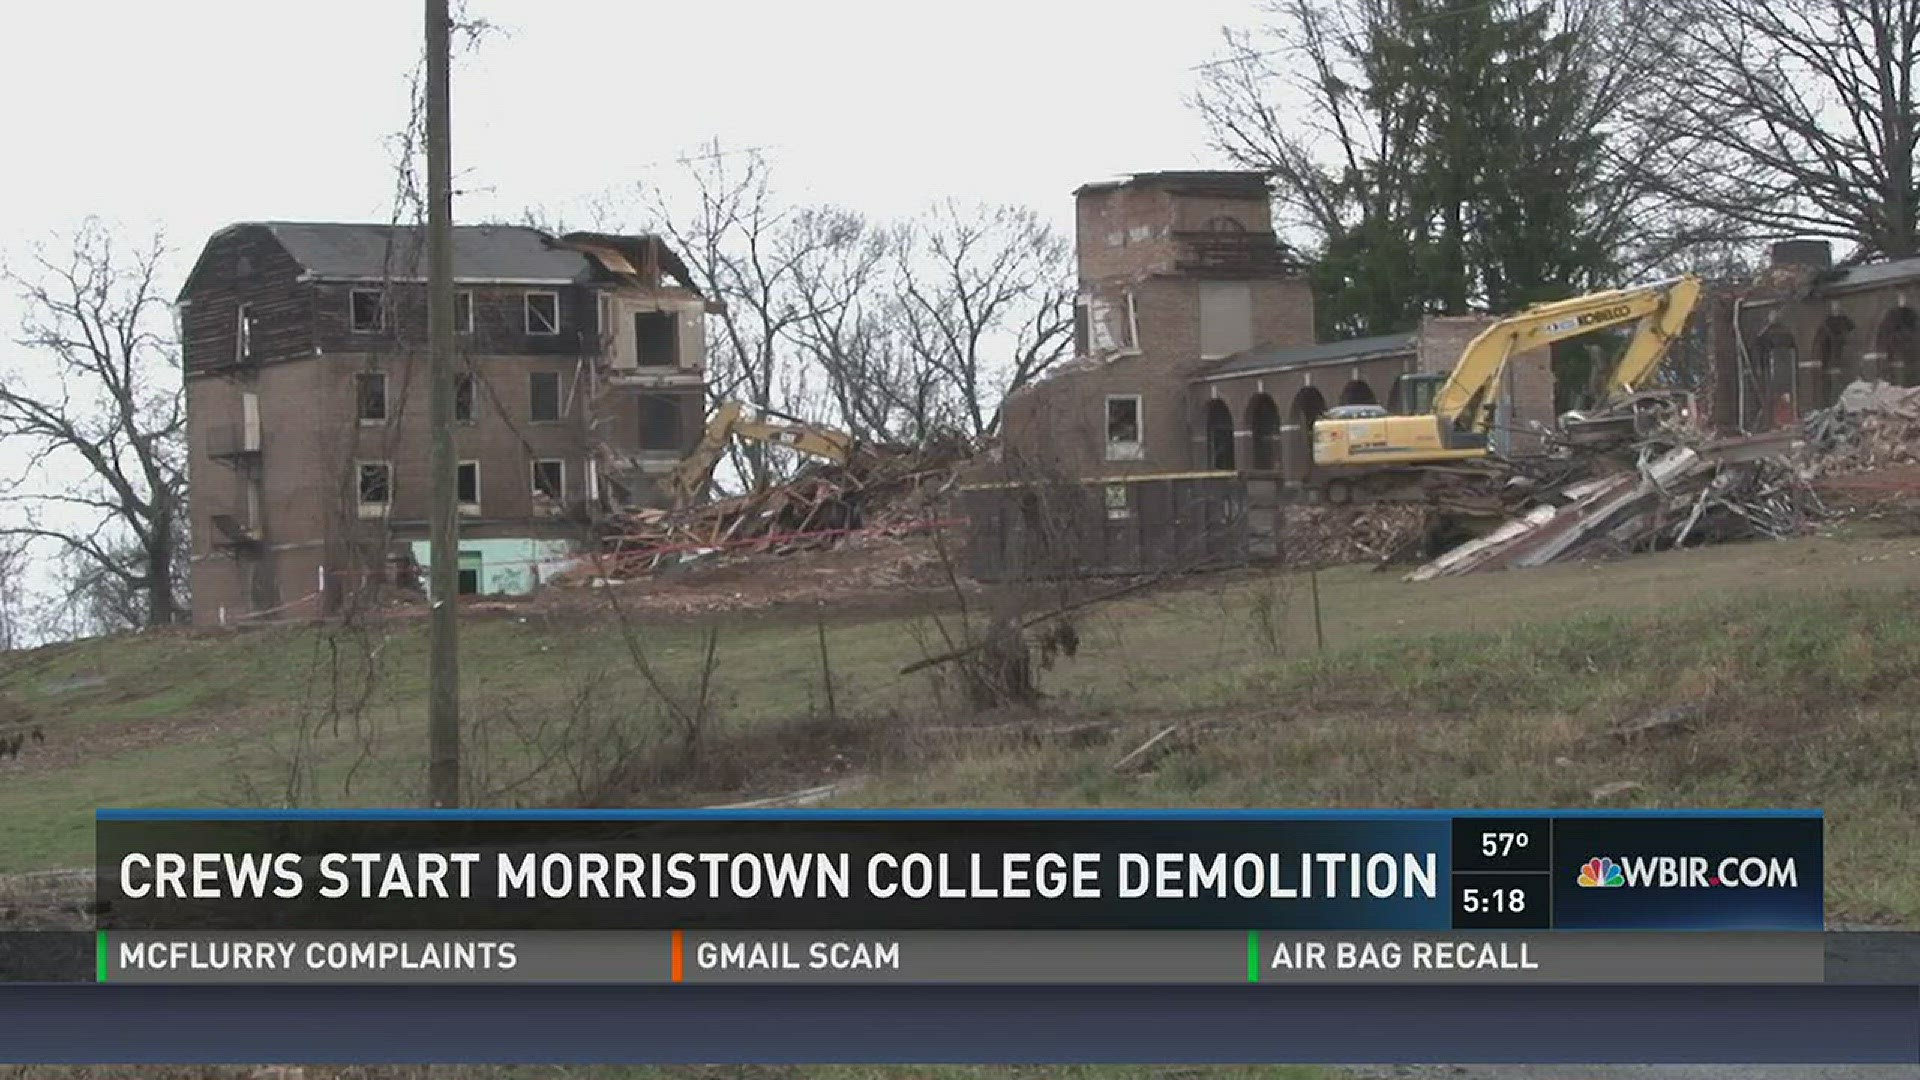 Jan. 19, 2017: Crews are working to tear down the historic Morristown College building.